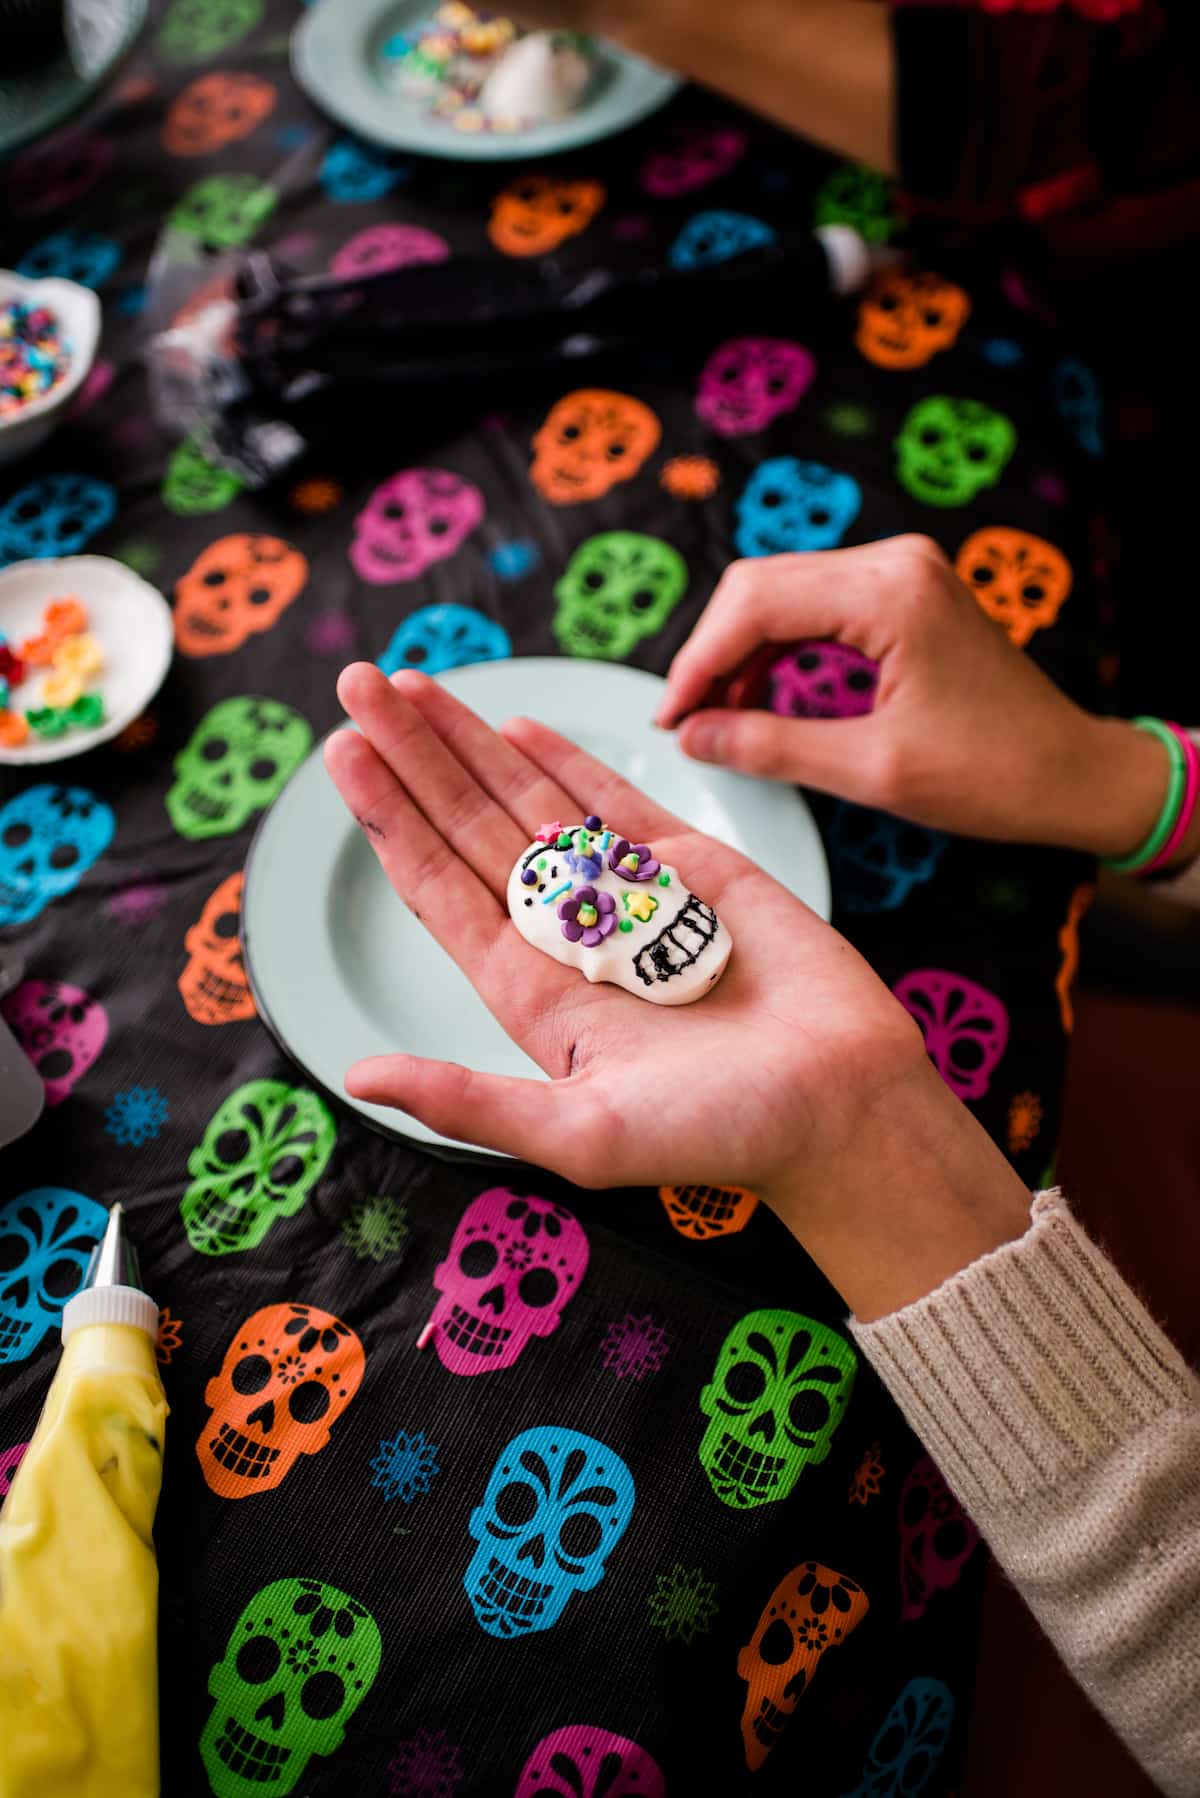 The author's children decorating their Dia de los Muertos candy skulls with colorful frosting, candy flowers, and sprinkles on top of a skull tablecloth 